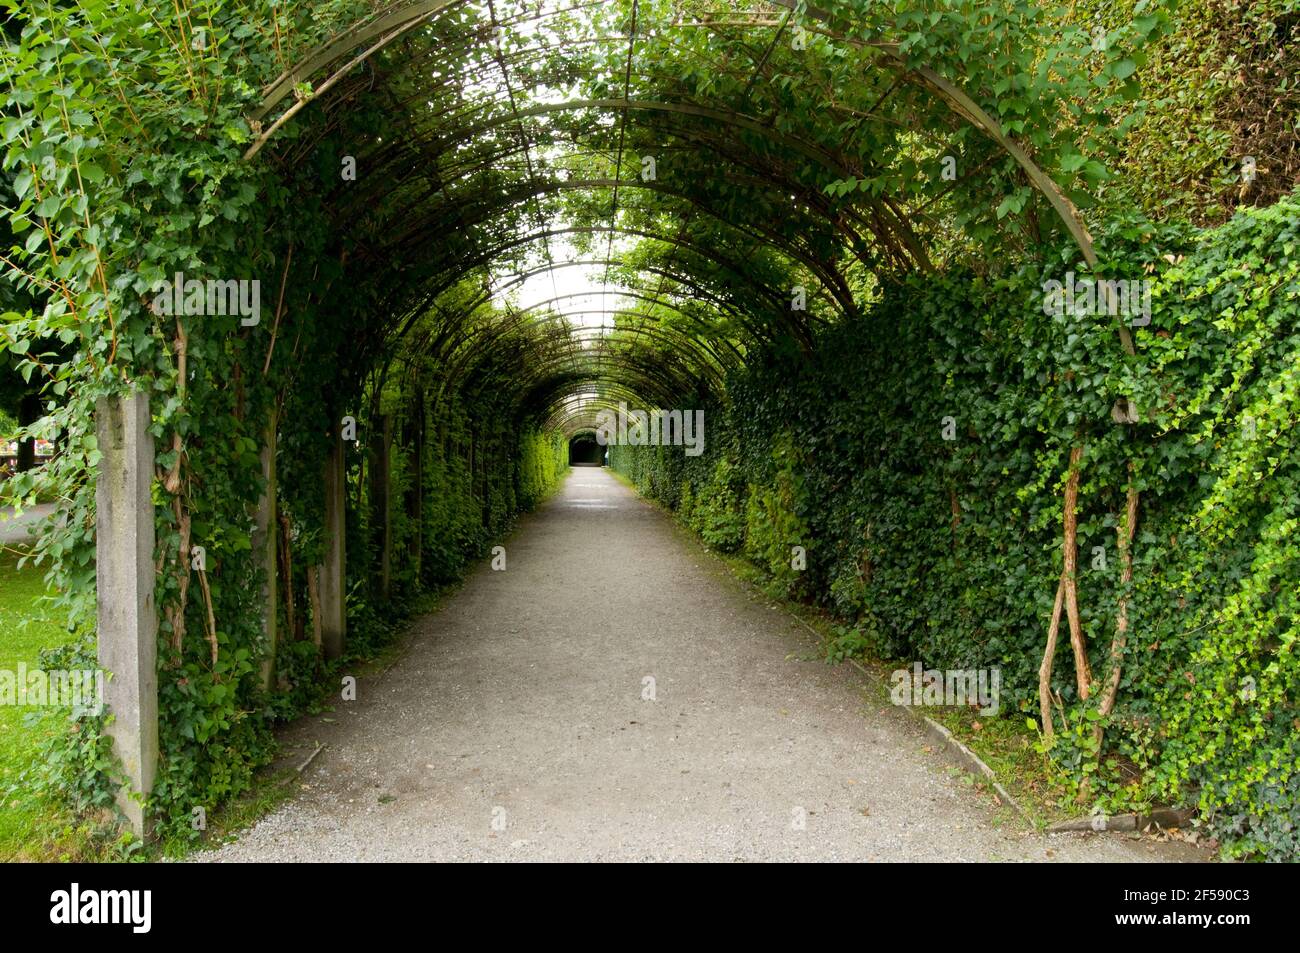 Green Hedgerow Archway Used In The Sound Of Music In Mirabell Gardens Salzburg Austria Stock Photo